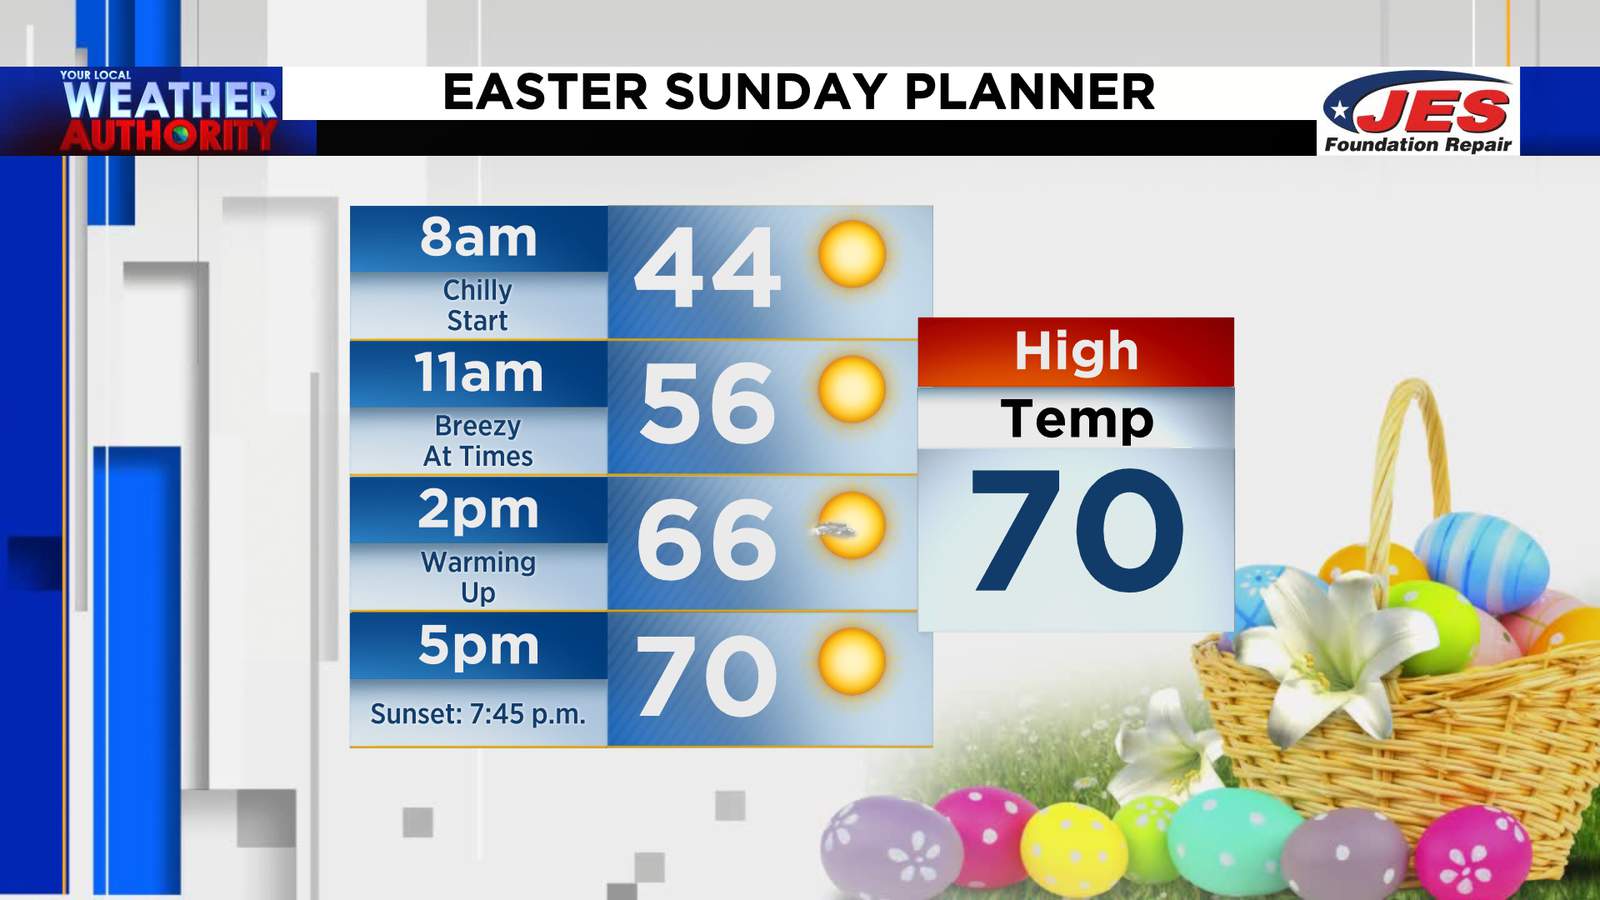 Happy Easter! Breezy and mild sunshine rules for the holiday